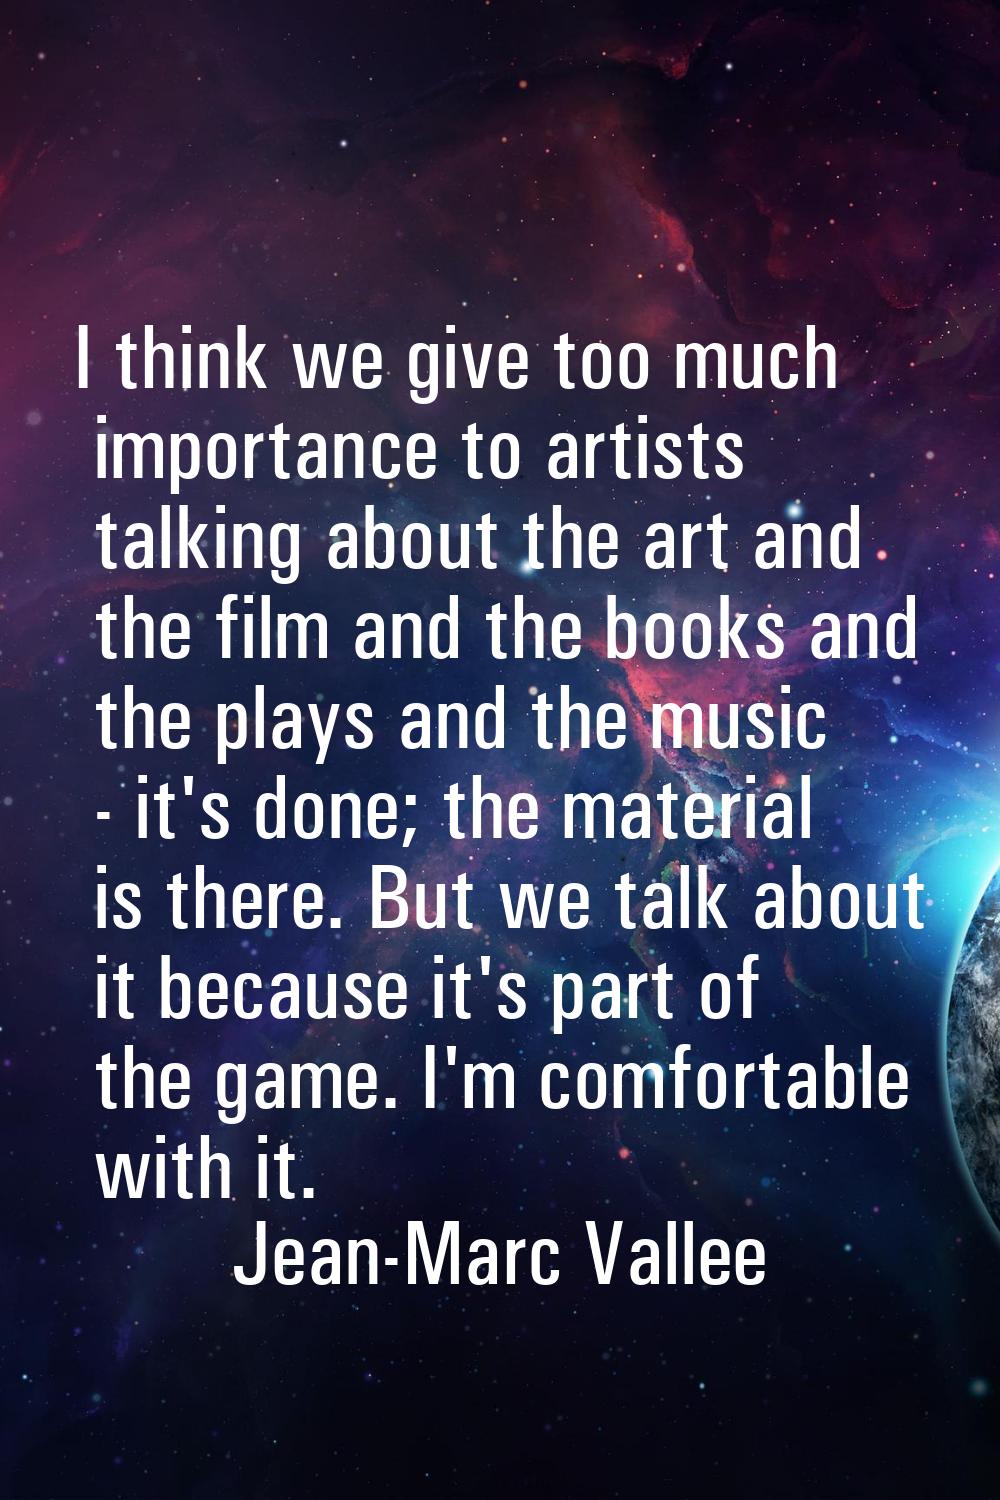 I think we give too much importance to artists talking about the art and the film and the books and